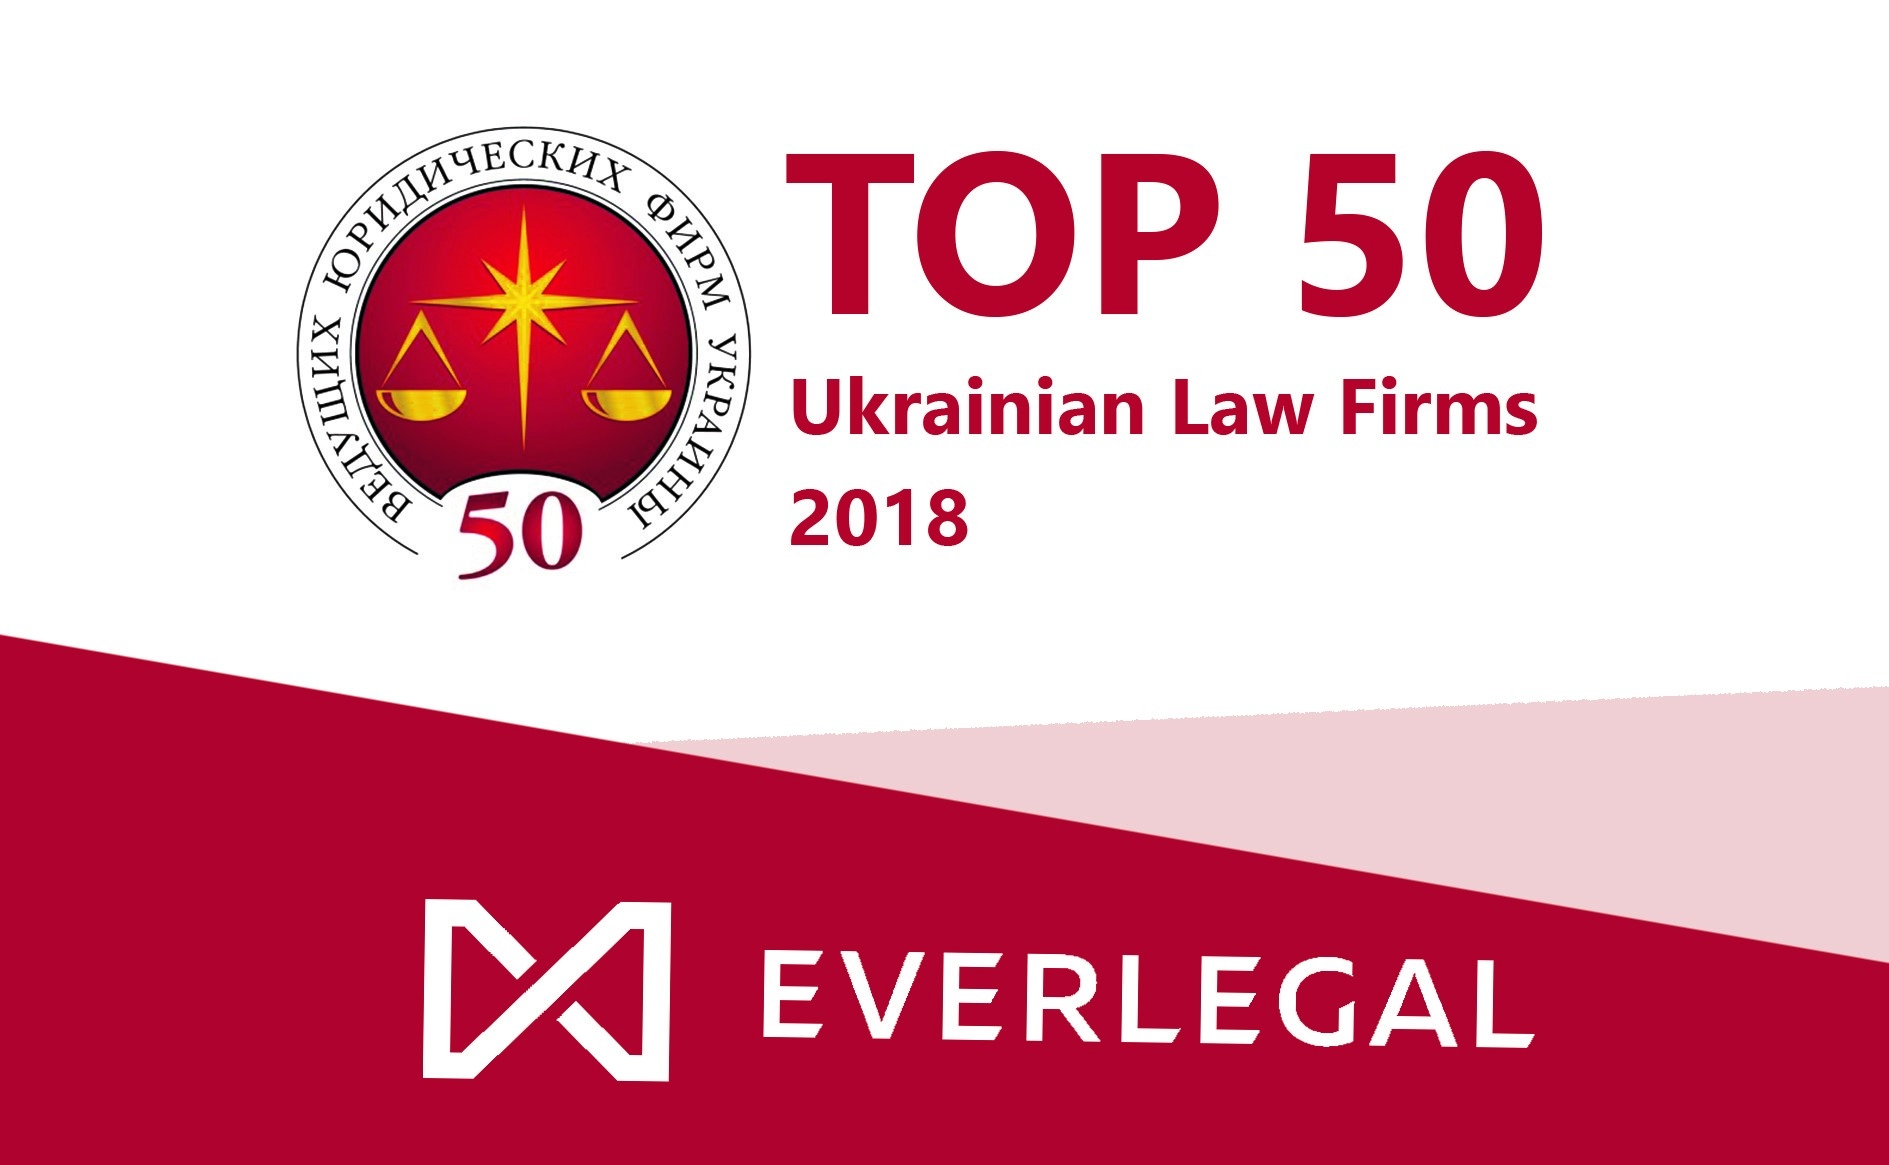 EVERLEGAL is a TOP50 Ukrainian Law Firm 2018